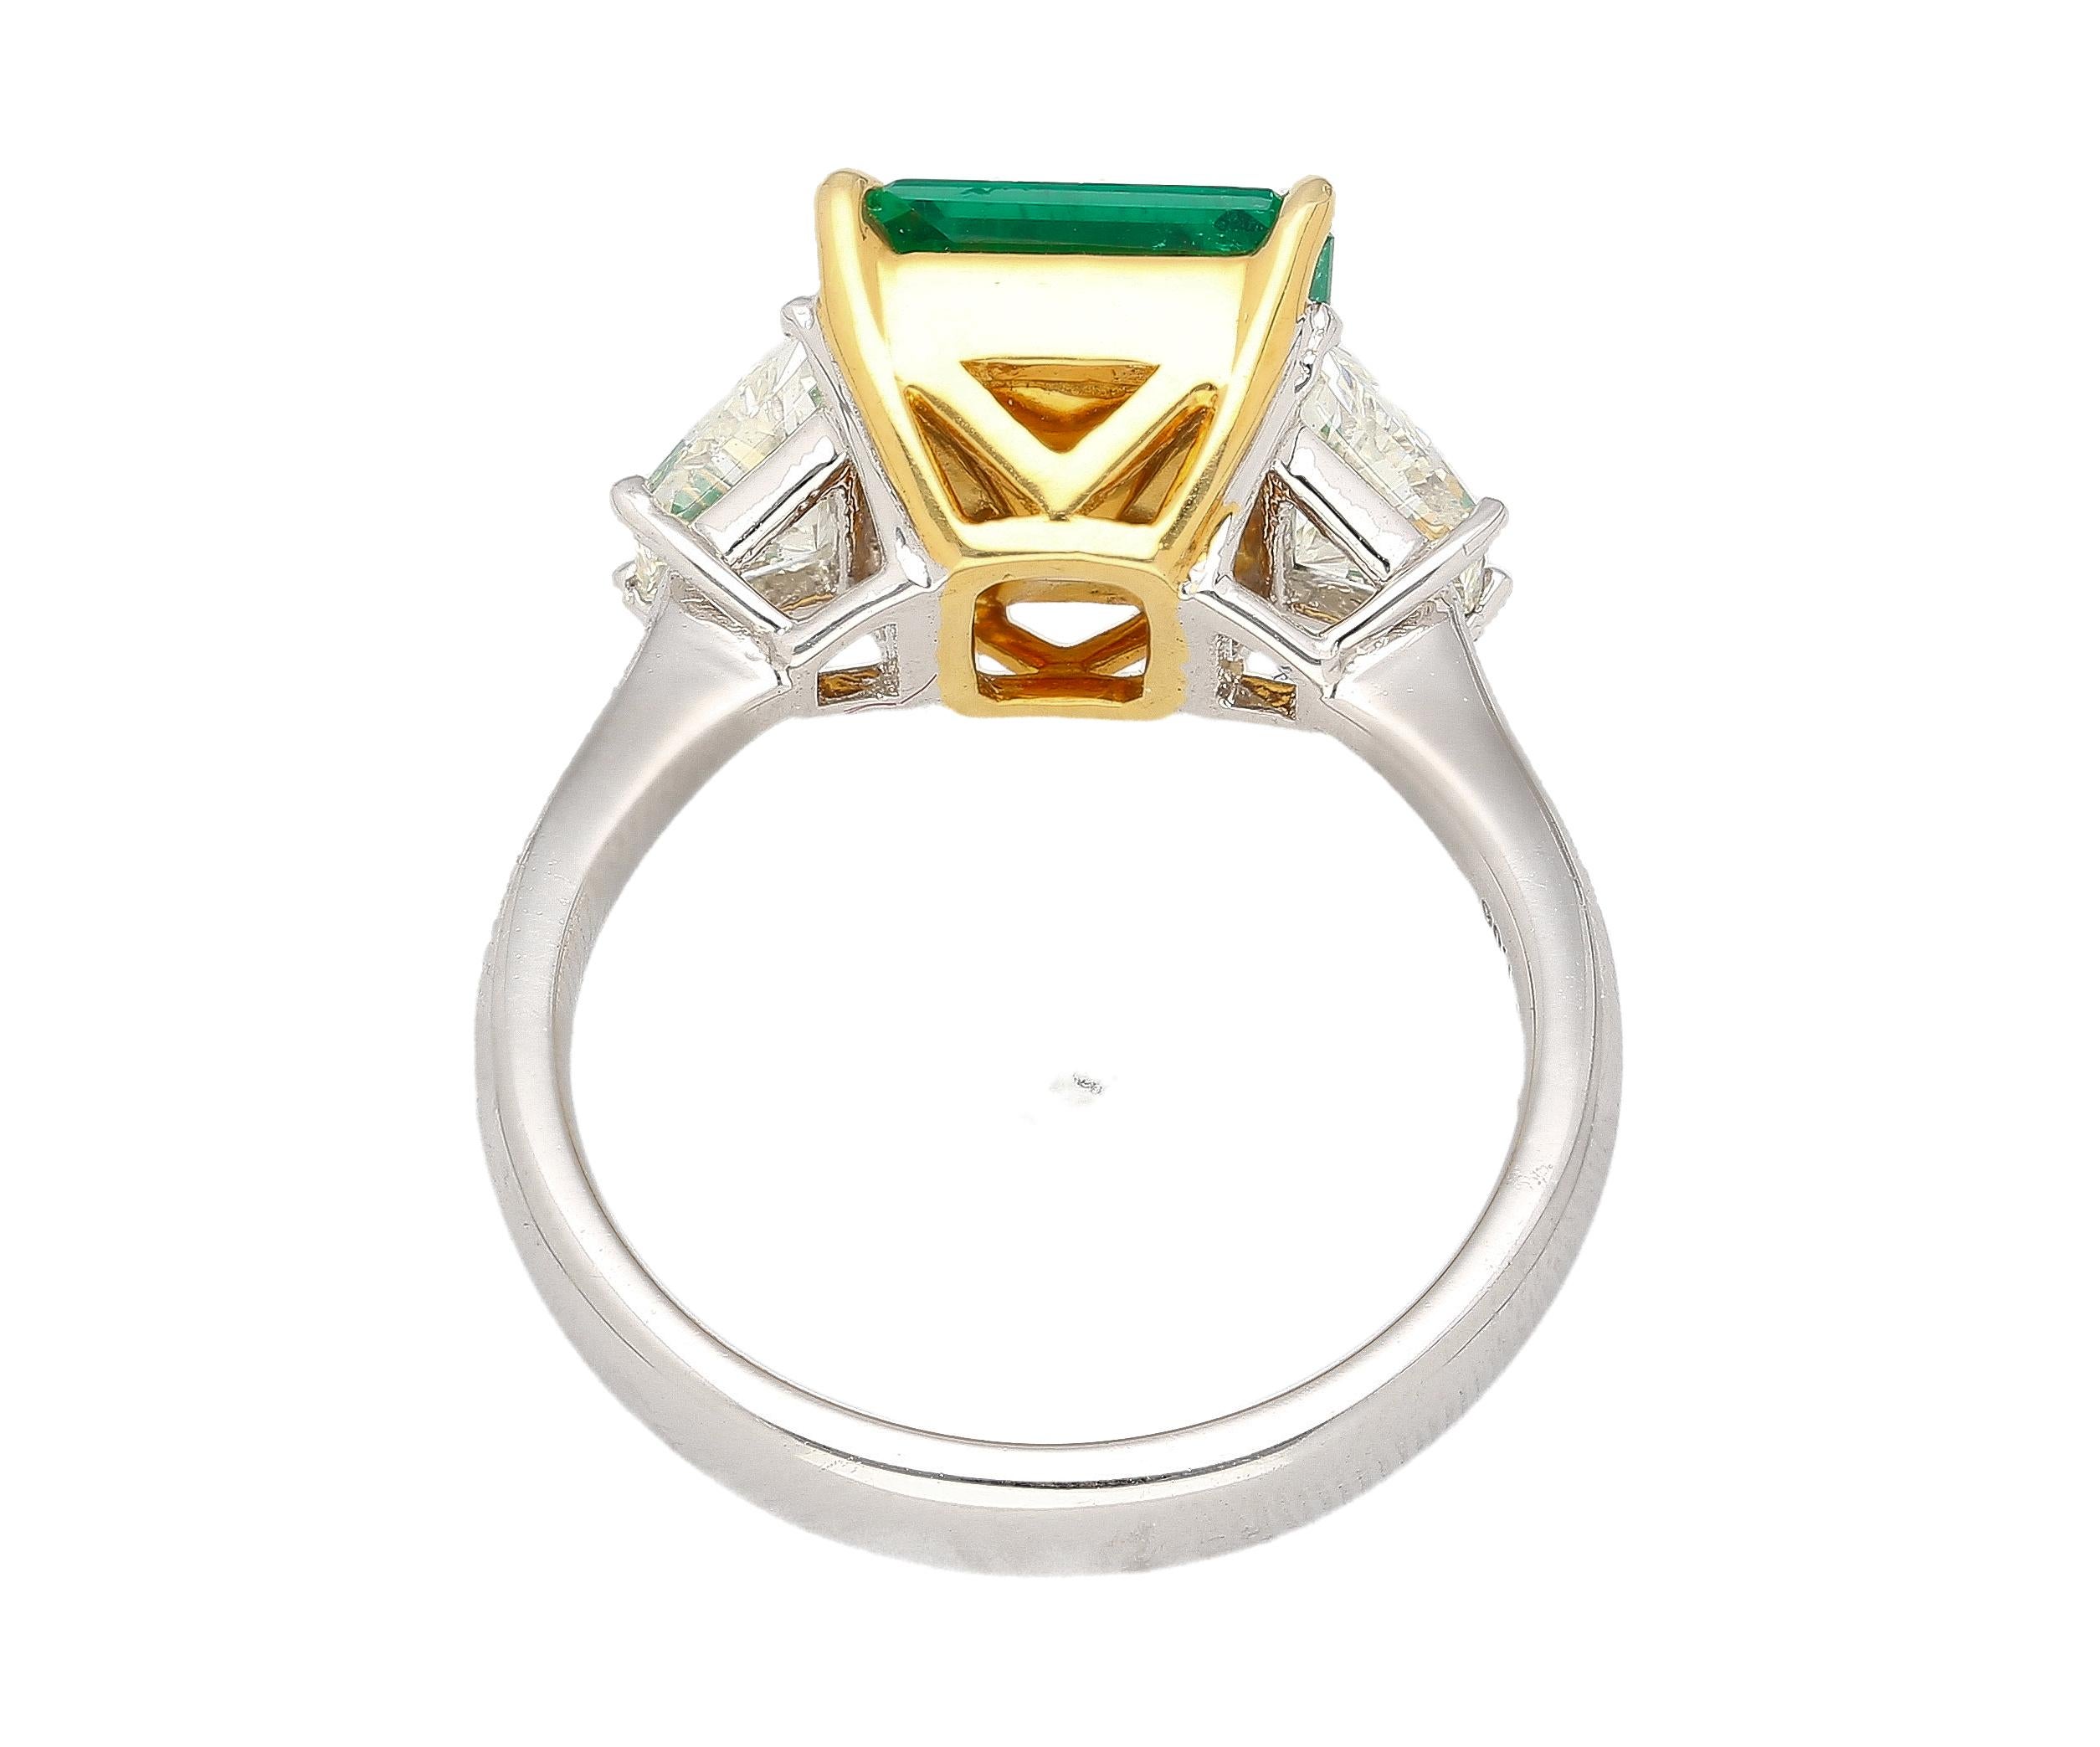 Natural AGL Certified No Oil Emerald & Diamond Detailing Three-Stone Engagement Ring.

This engagement ring features a stunning, vivid green emerald center stone with a carat weight of 2.44. This stone is extremely rare, bearing excellent luster,